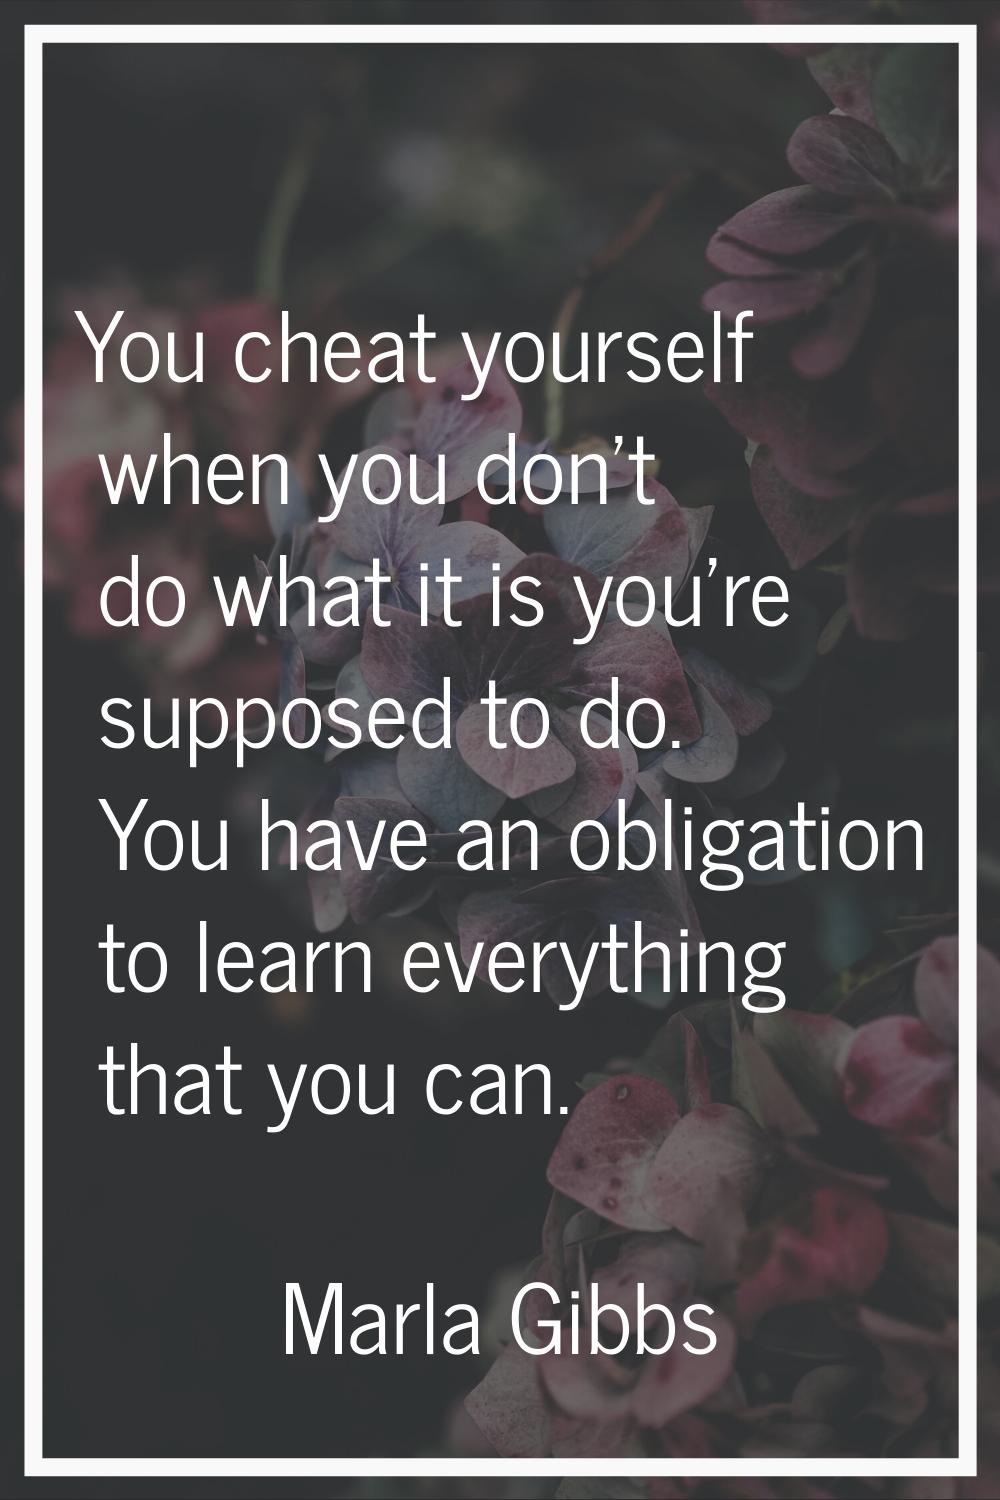 You cheat yourself when you don't do what it is you're supposed to do. You have an obligation to le